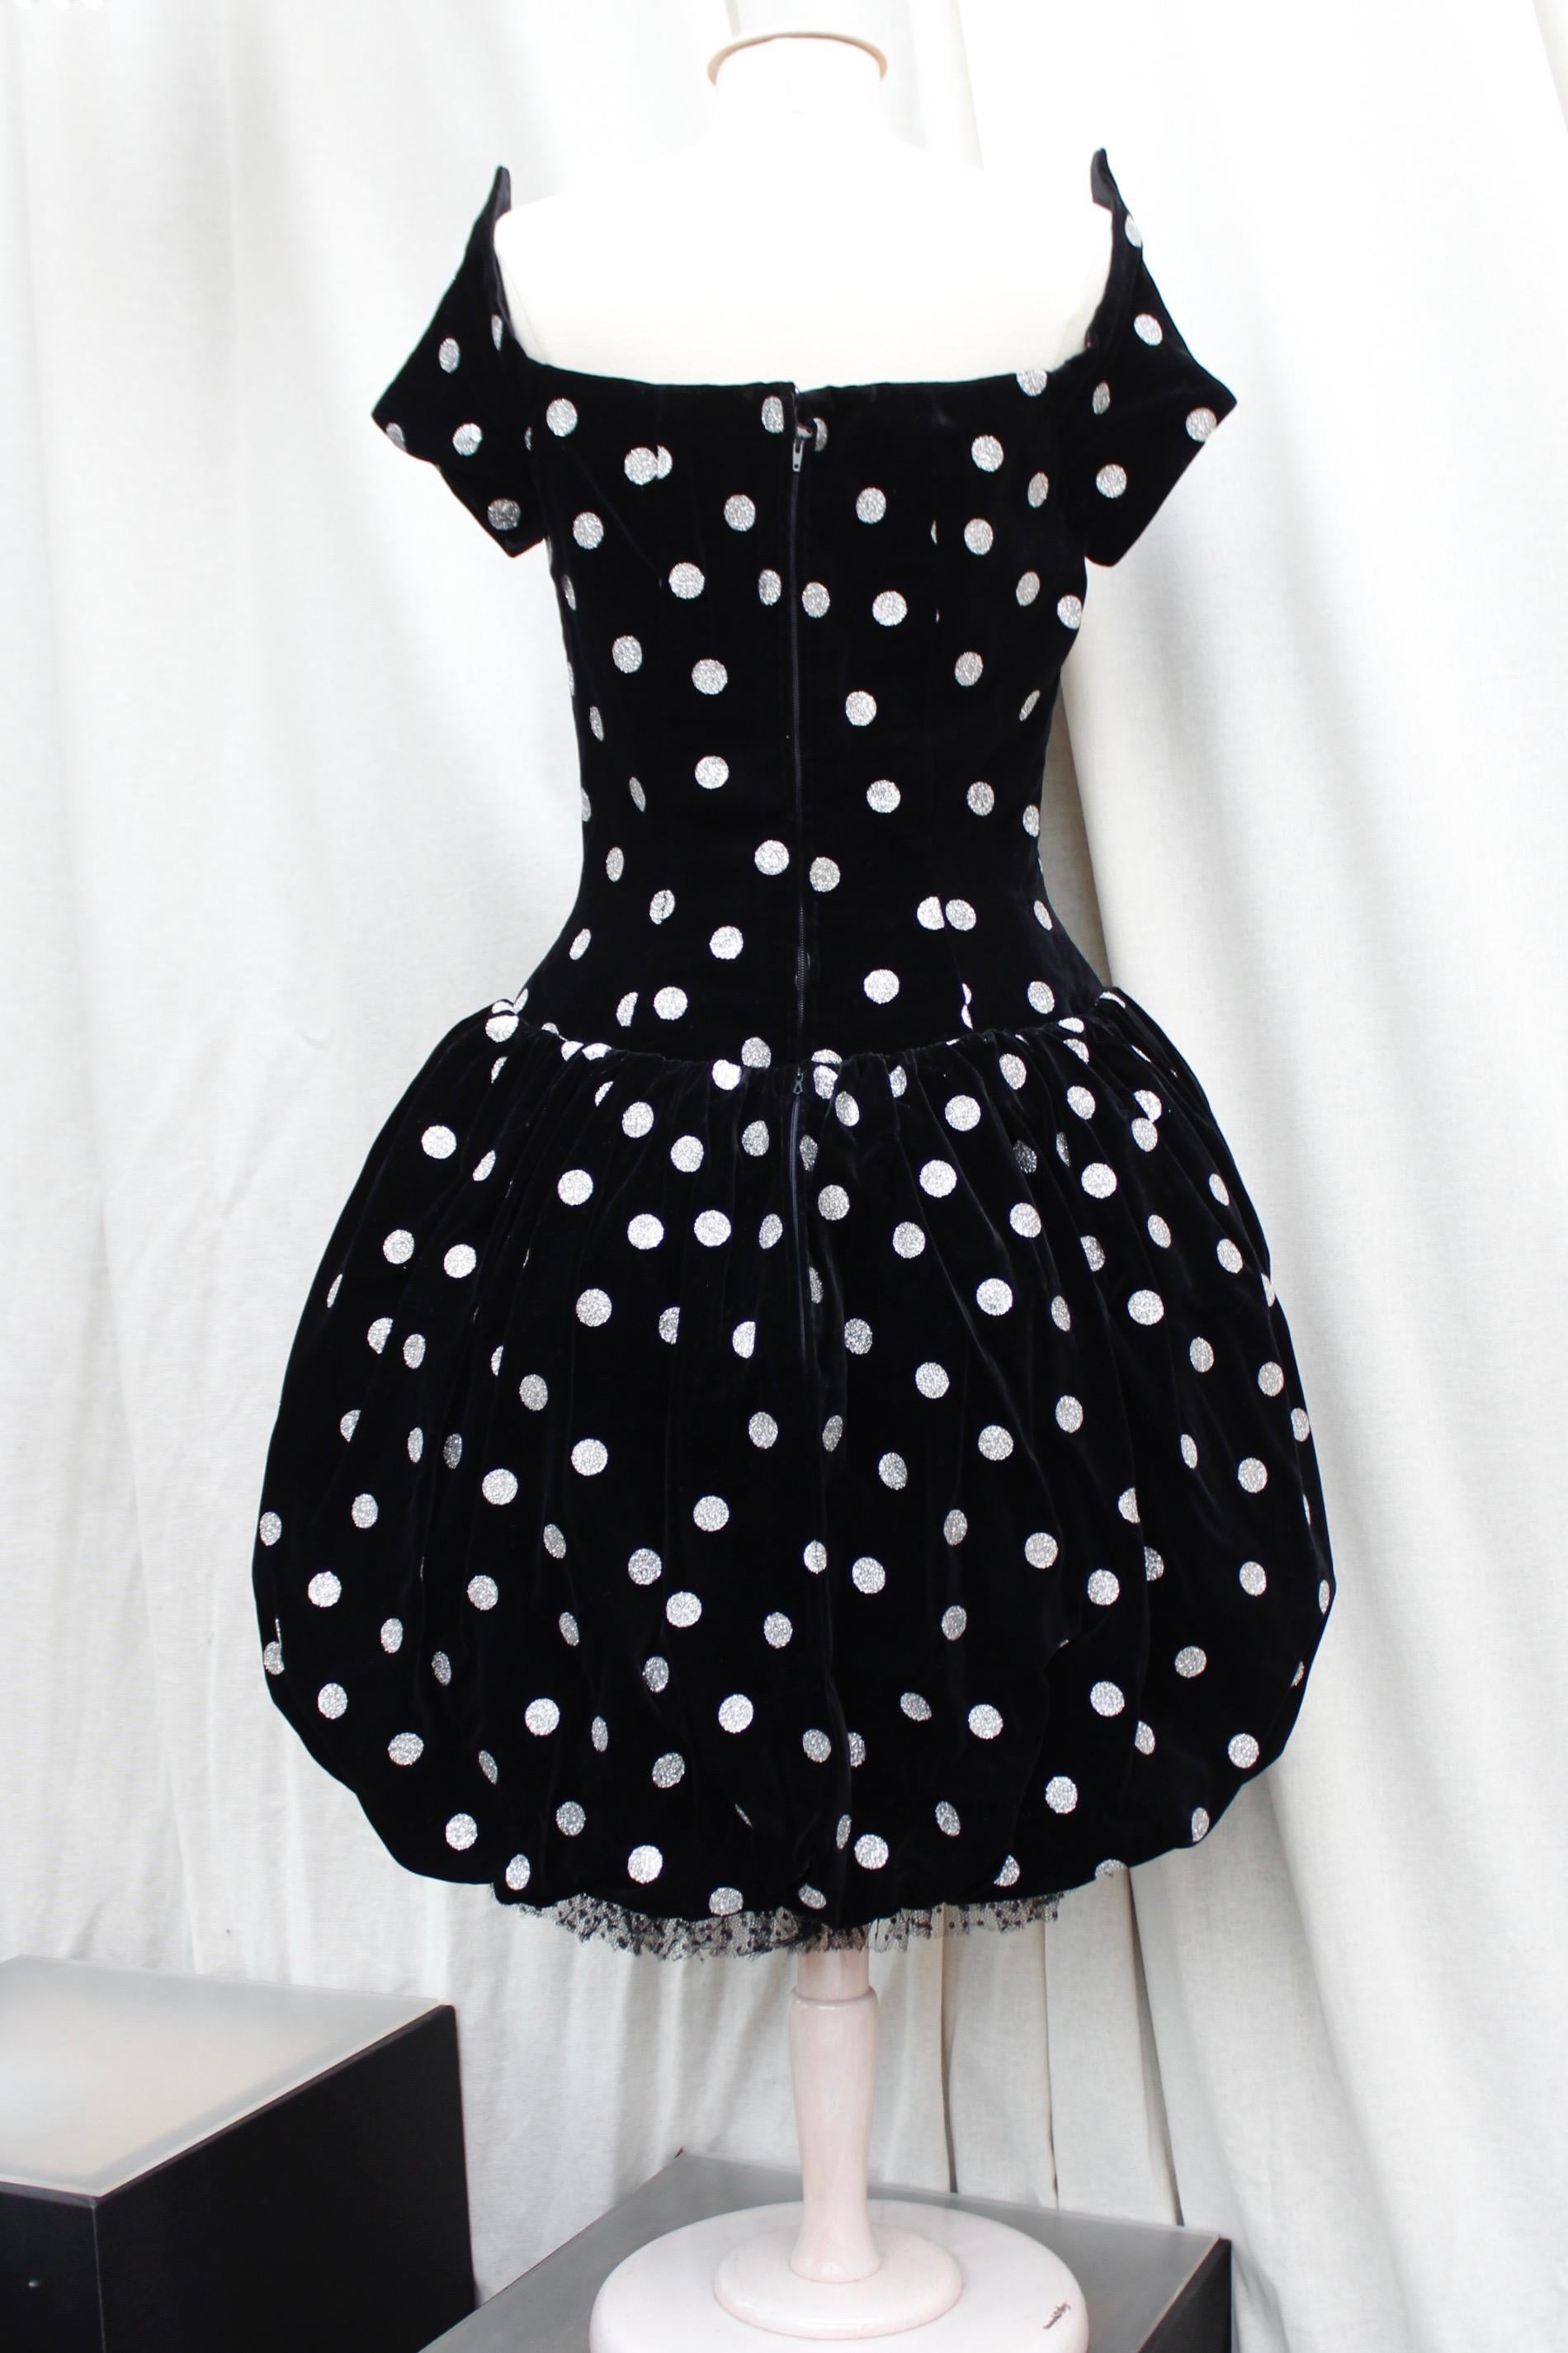 Lanvin lovely ball-shaped dress in black velvet with silvery dots In Good Condition For Sale In Paris, FR